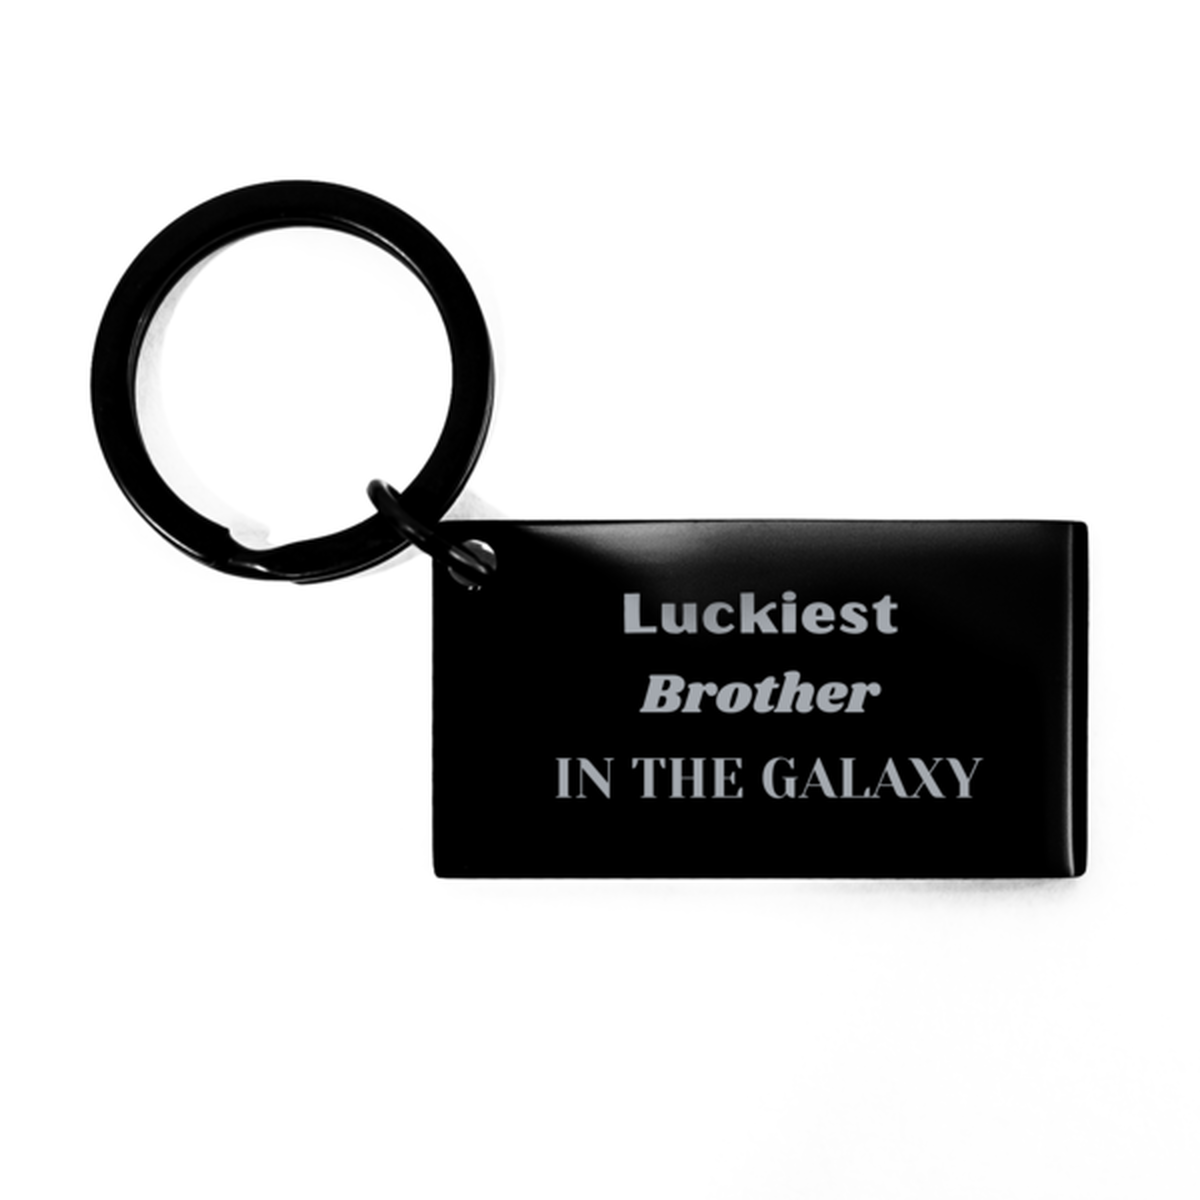 Luckiest Brother in the Galaxy, To My Brother Engraved Gifts, Christmas Brother Keychain Gifts, X-mas Birthday Unique Gifts For Brother Men Women